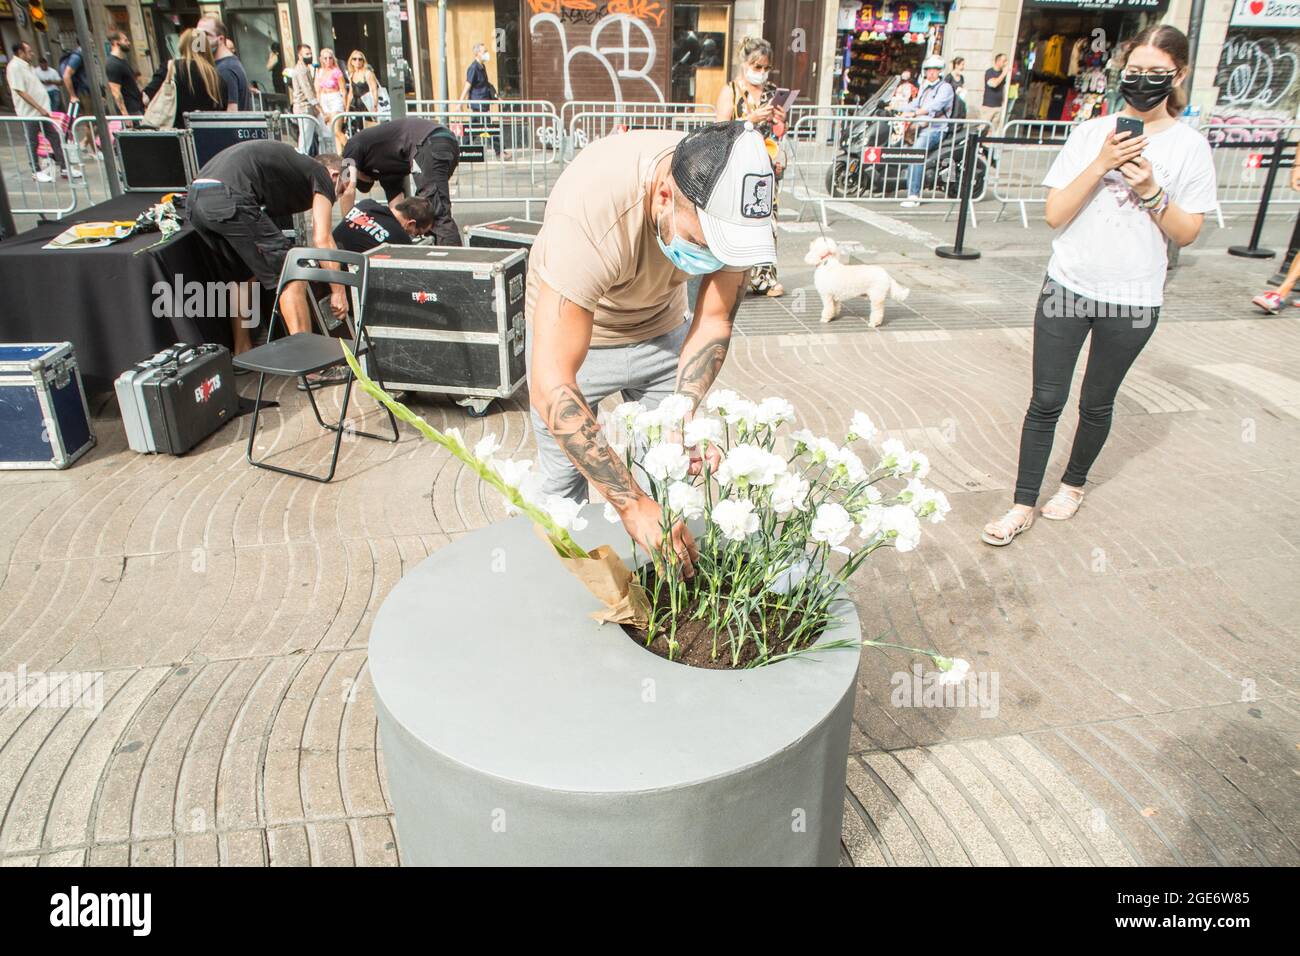 Barcelona, Catalonia, Spain. 17th Aug, 2021. Person is seen depositing flowers to the victims of the Las Ramblas attack in Barcelona.Barcelona pays tribute to the victims on the fourth anniversary of the jihadist attack on La Rambla where on August 17, 2017, a van carried out the massive outrage, which caused the death of 15 people.The families of the victims have been the protagonists of the ceremony, depositing white carnations and bouquets of flowers in three cylinders. This was followed by the authorities, with the mayor of Barcelona, Ada Colau, the president of the Generalitat of Catal Stock Photo